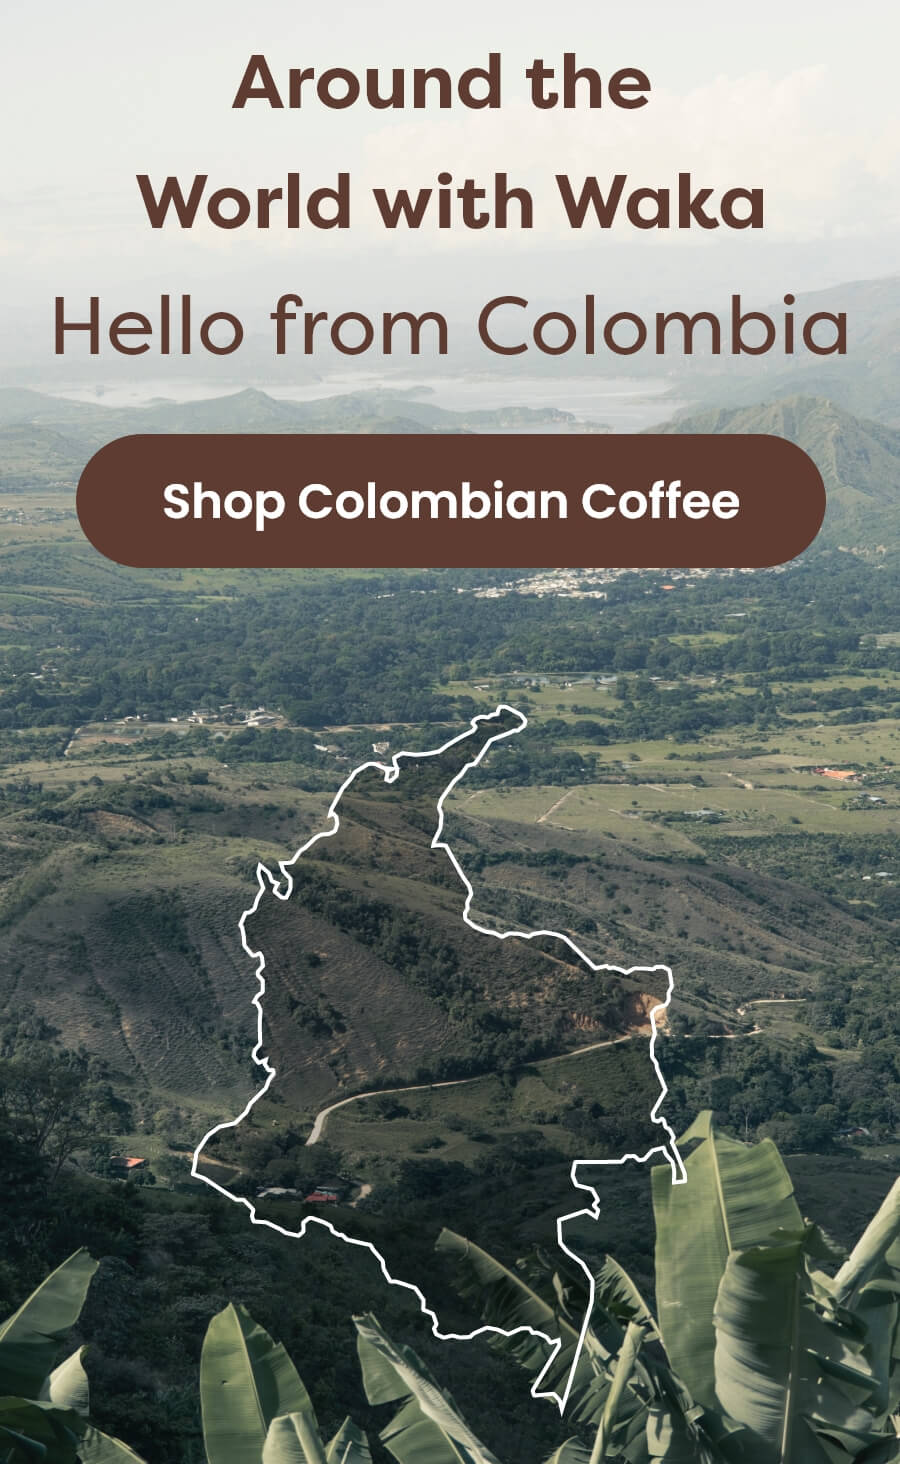 Around the World with Waka: Hello from Colombia [Shop Colombian Coffee]